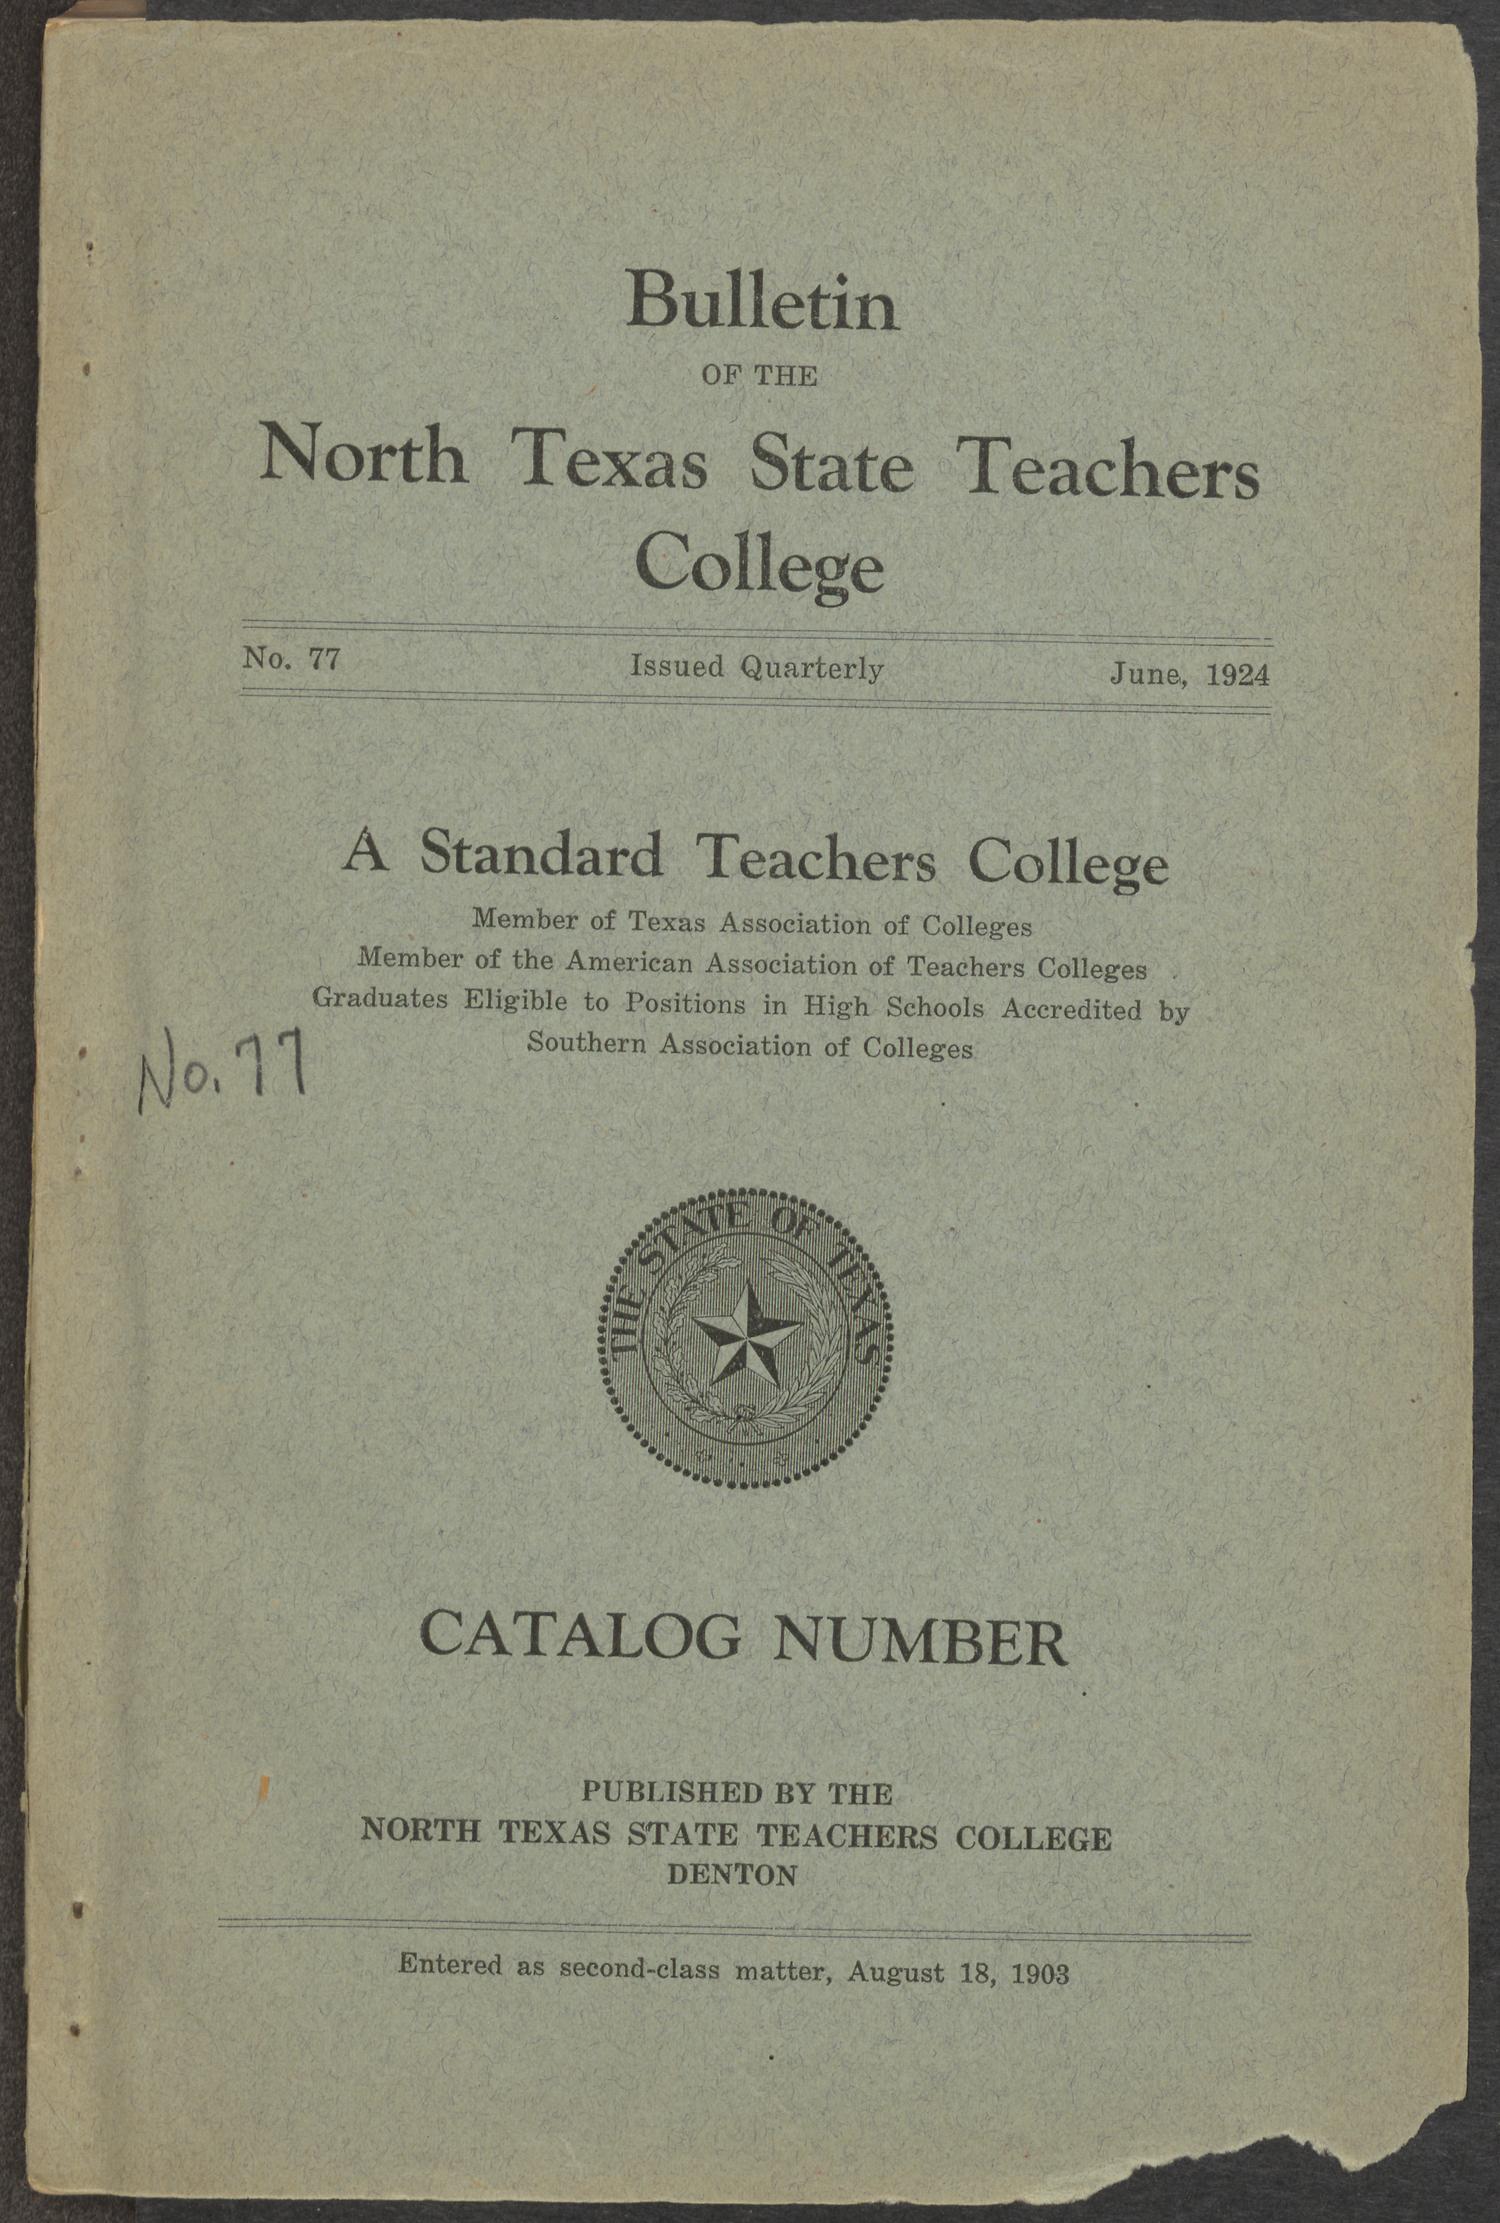 Catalog of North Texas State Teachers College: June 1924
                                                
                                                    Front Cover
                                                